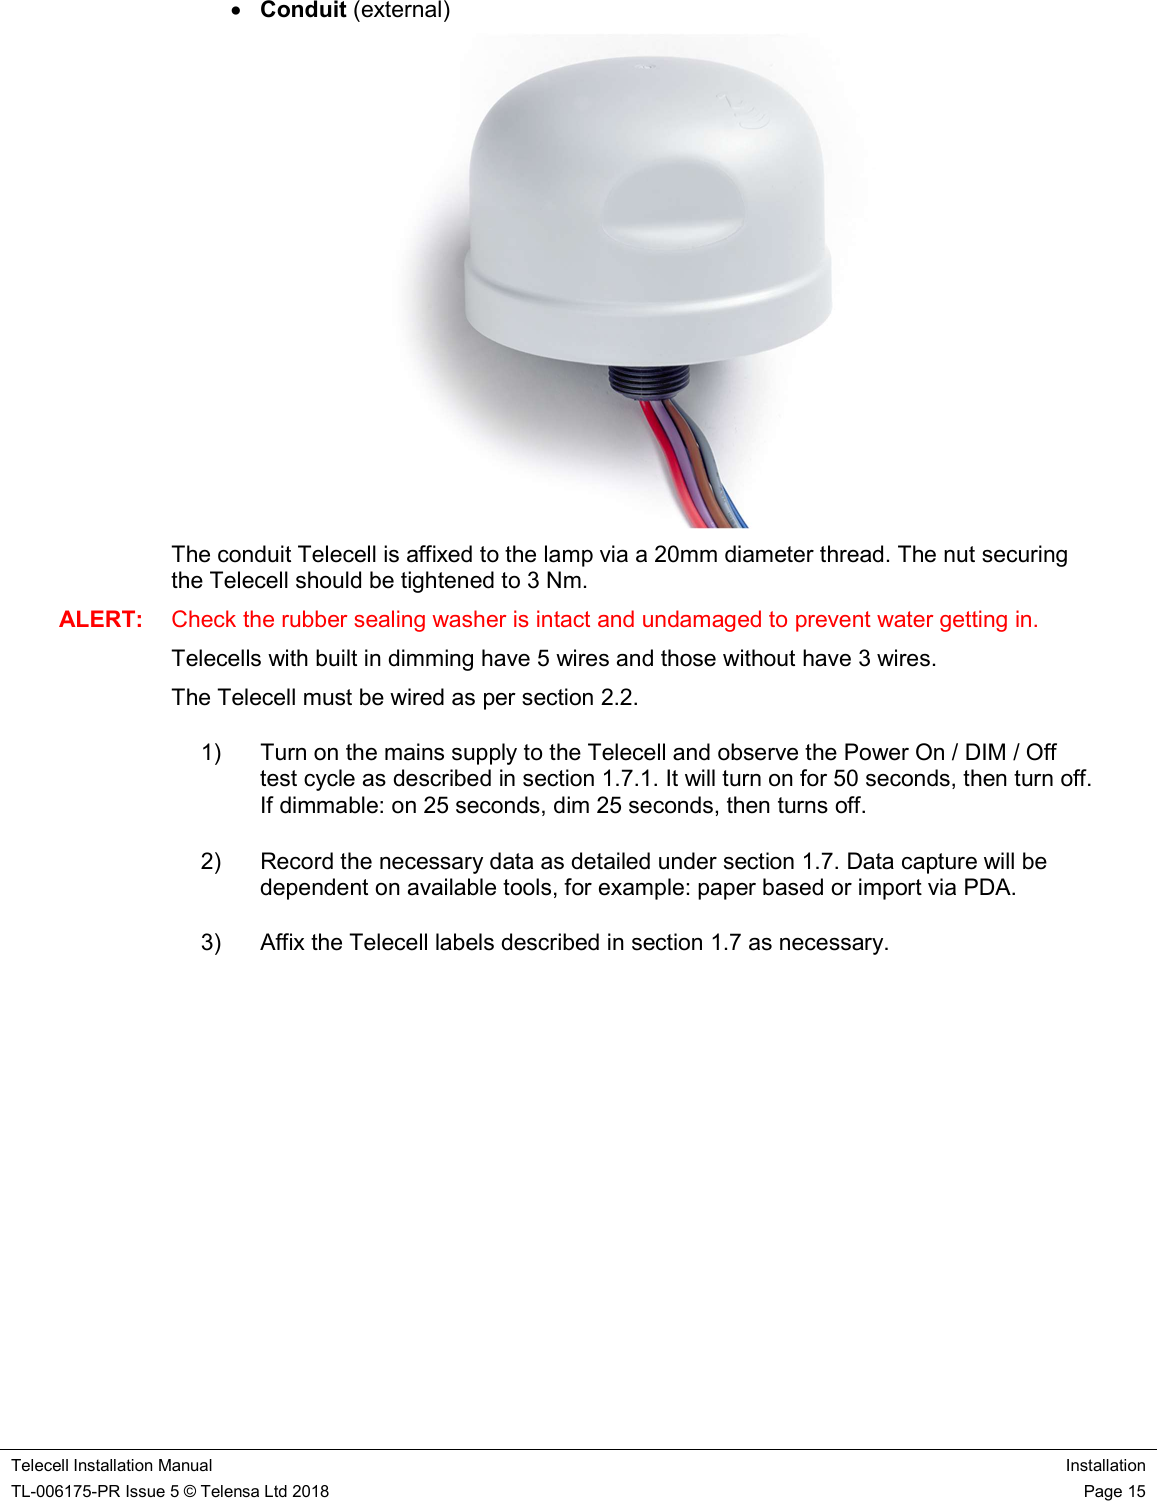    Telecell Installation Manual Installation TL-006175-PR Issue 5 © Telensa Ltd 2018    Page 15   Conduit (external)  The conduit Telecell is affixed to the lamp via a 20mm diameter thread. The nut securing the Telecell should be tightened to 3 Nm. ALERT:  Check the rubber sealing washer is intact and undamaged to prevent water getting in. Telecells with built in dimming have 5 wires and those without have 3 wires. The Telecell must be wired as per section 2.2. 1)  Turn on the mains supply to the Telecell and observe the Power On / DIM / Off test cycle as described in section 1.7.1. It will turn on for 50 seconds, then turn off. If dimmable: on 25 seconds, dim 25 seconds, then turns off. 2)  Record the necessary data as detailed under section 1.7. Data capture will be dependent on available tools, for example: paper based or import via PDA. 3)  Affix the Telecell labels described in section 1.7 as necessary.          